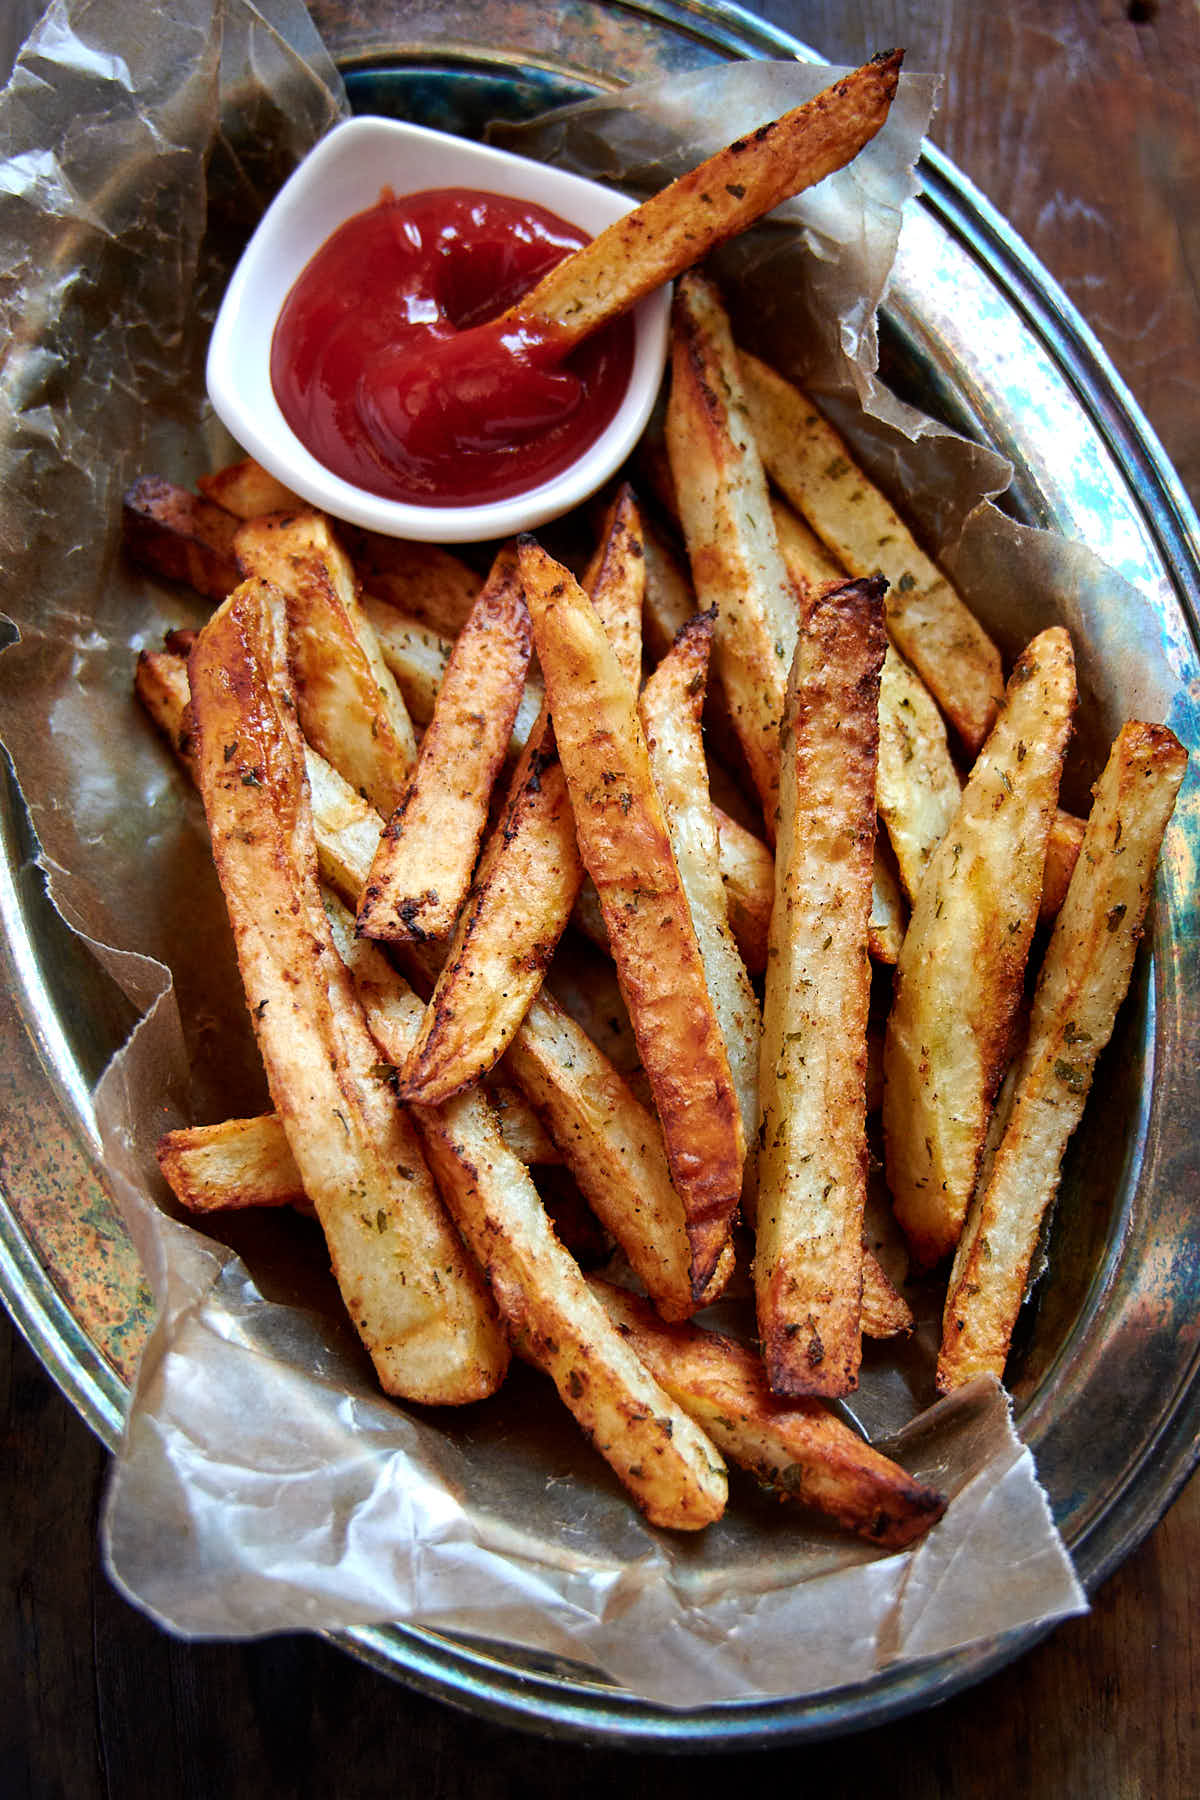 Crispy golden brown French fries in a basket lined with brown wax paper and a saucer with ketchup on the side.